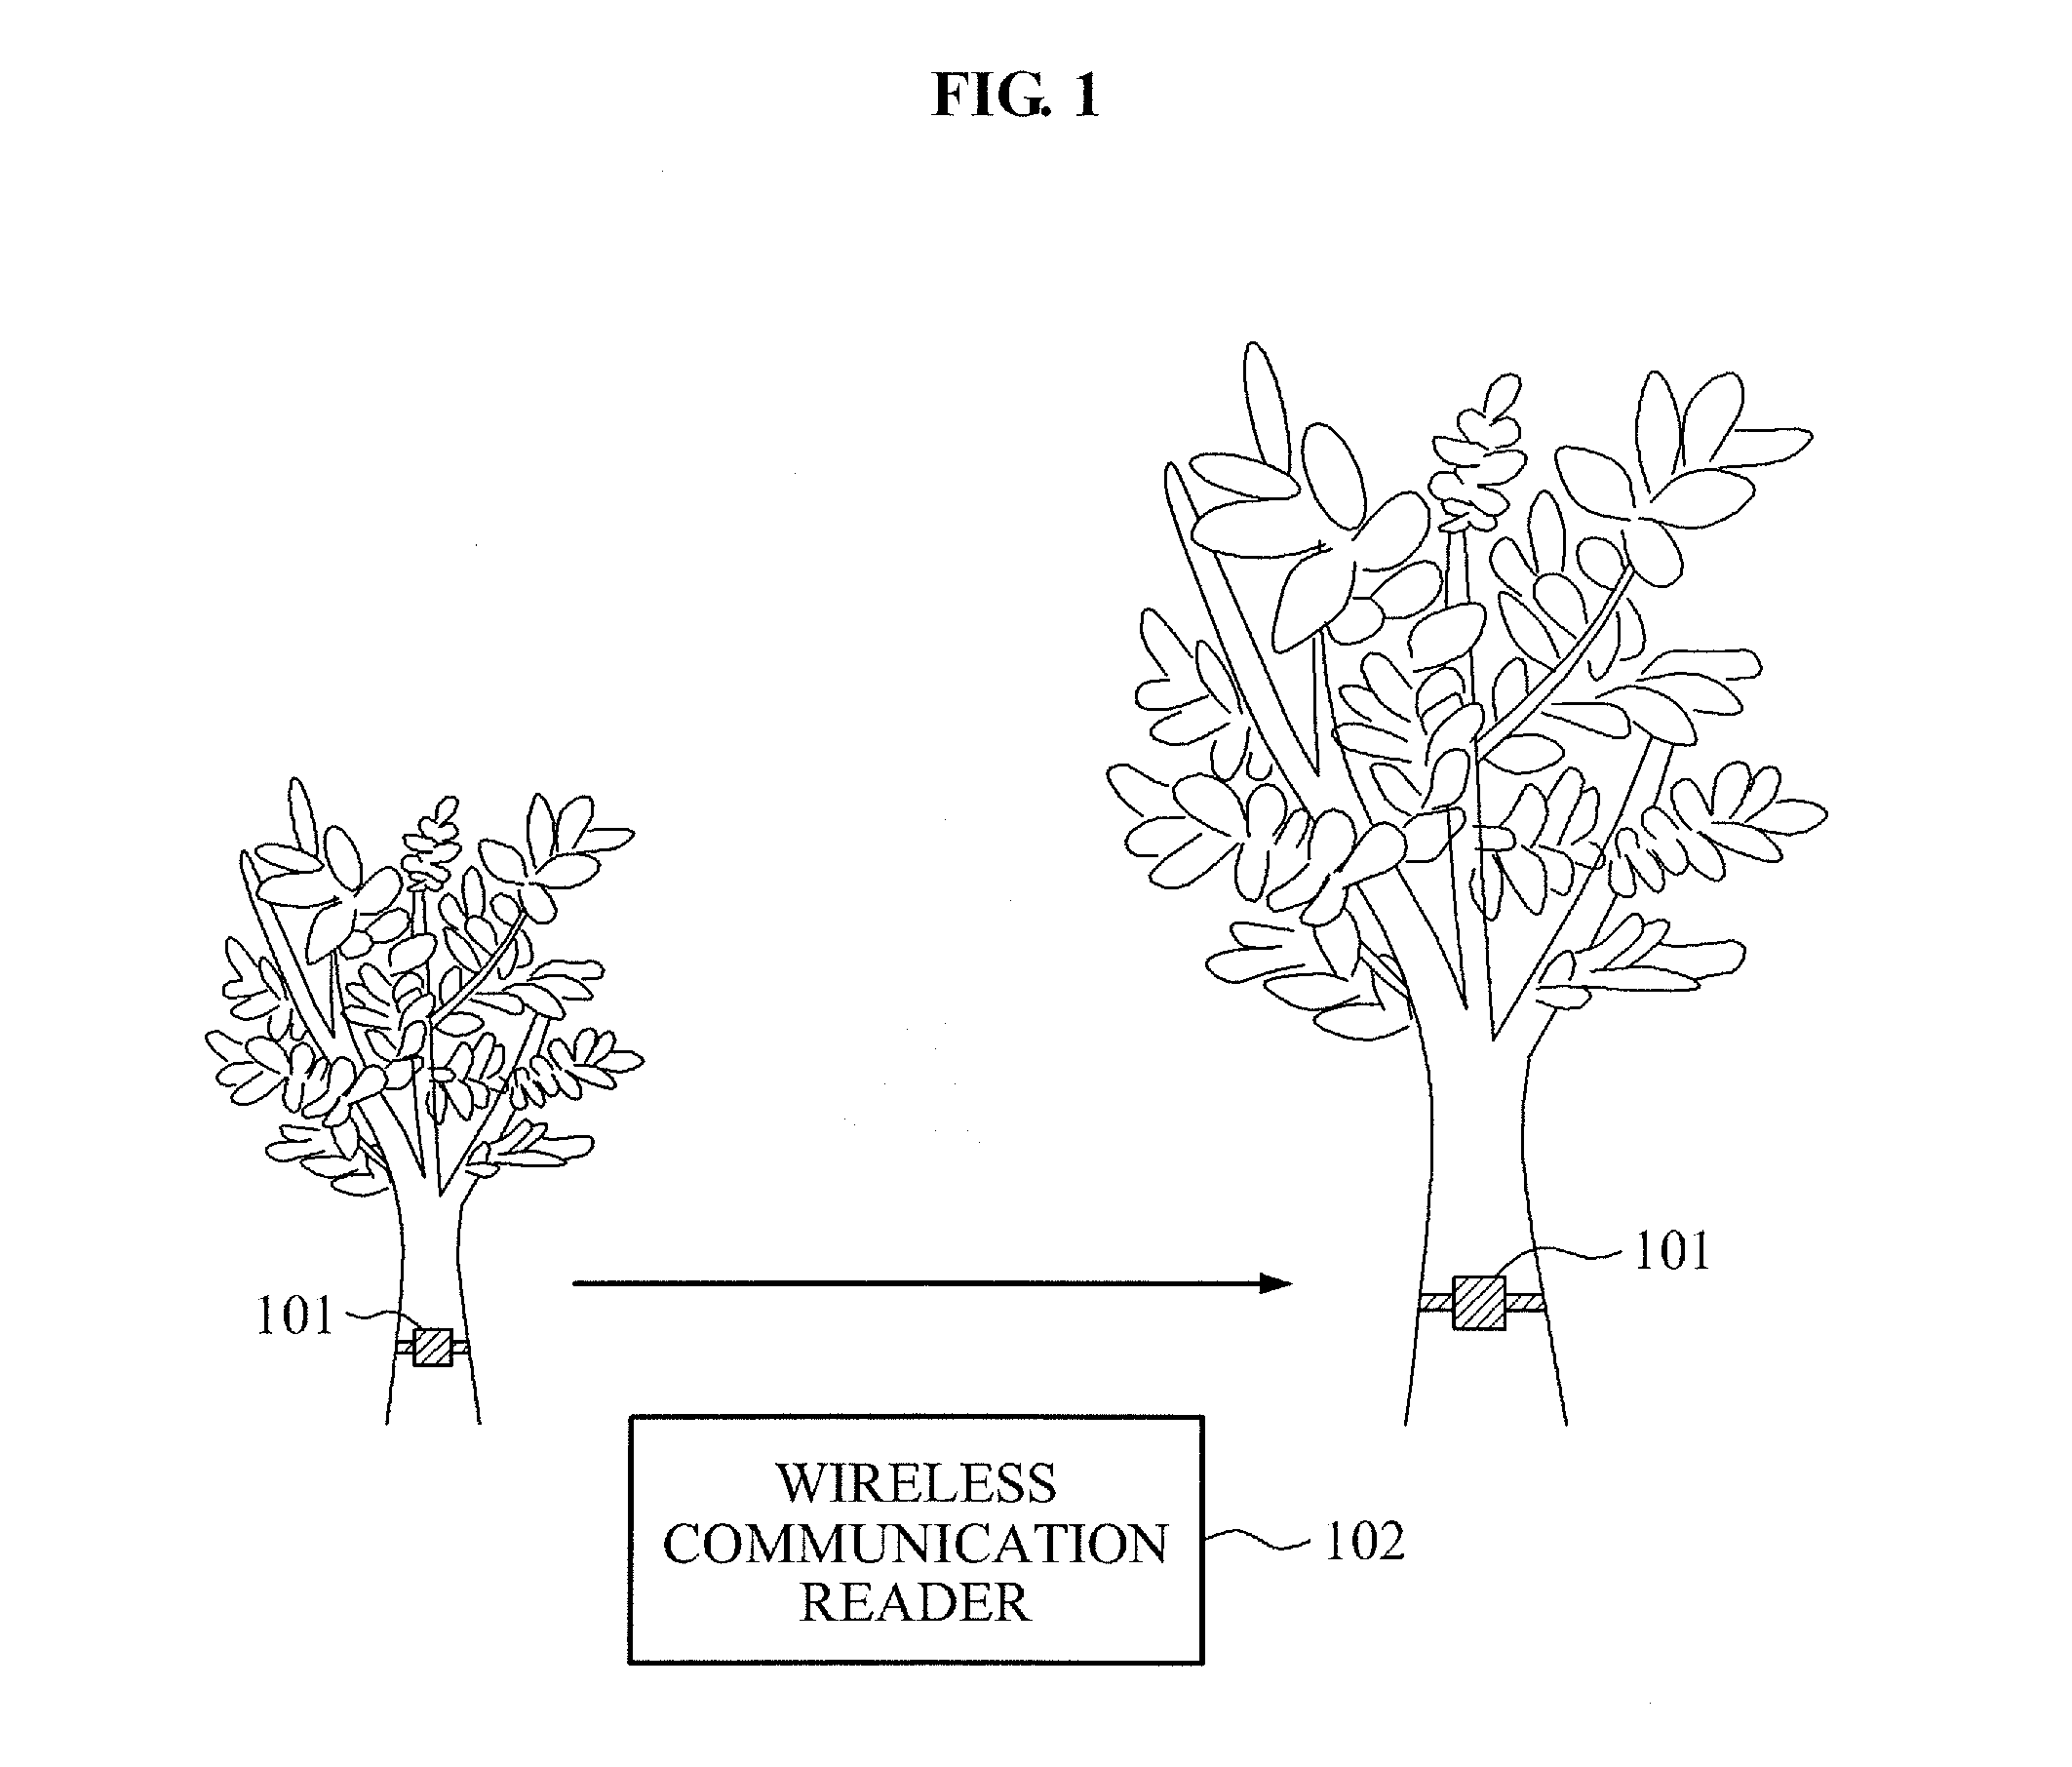 Girth measuring device and method for measuring girth of tree, and wireless communication tag apparatus including girth measuring device